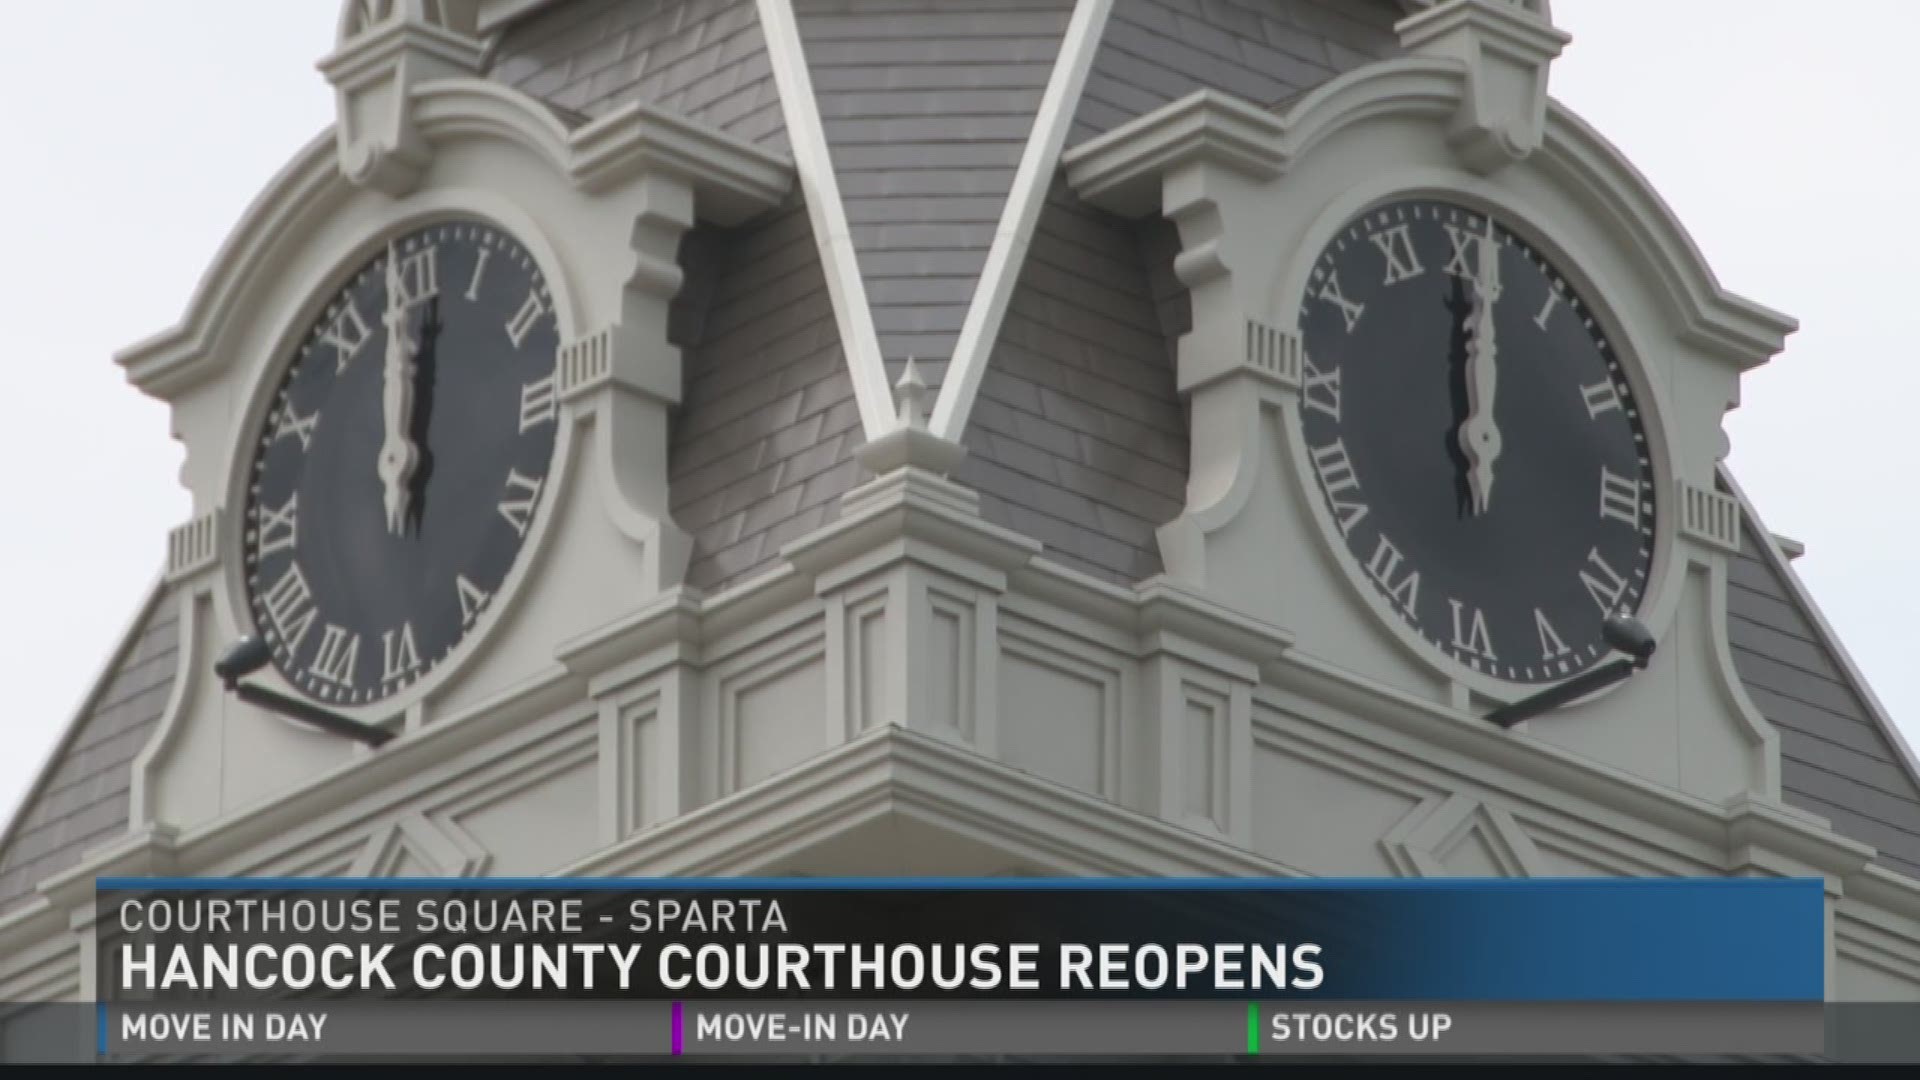 Hancock County courthouse reopens